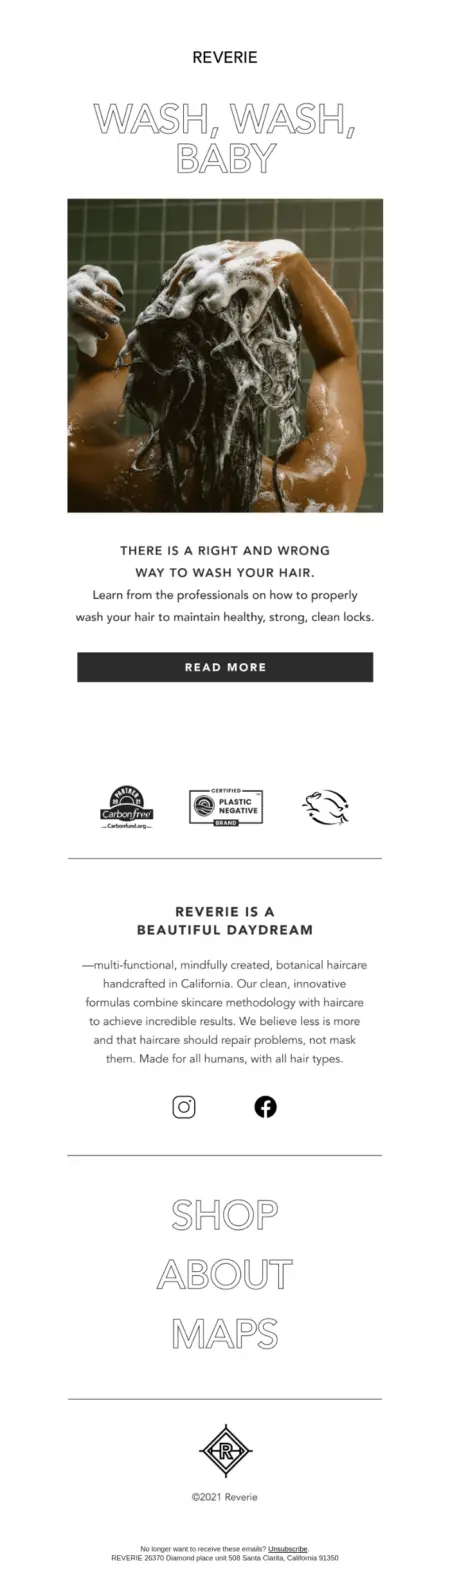 Image shows the body of an email from haircare brand Reverie. Above a shot of a model shampooing their hair, the headline reads, “Wash, wash, baby.” Below the image is a provocative statement: “There’s a right way and a wrong way to wash your hair,” followed by a CTA that says simply, “Read more.”